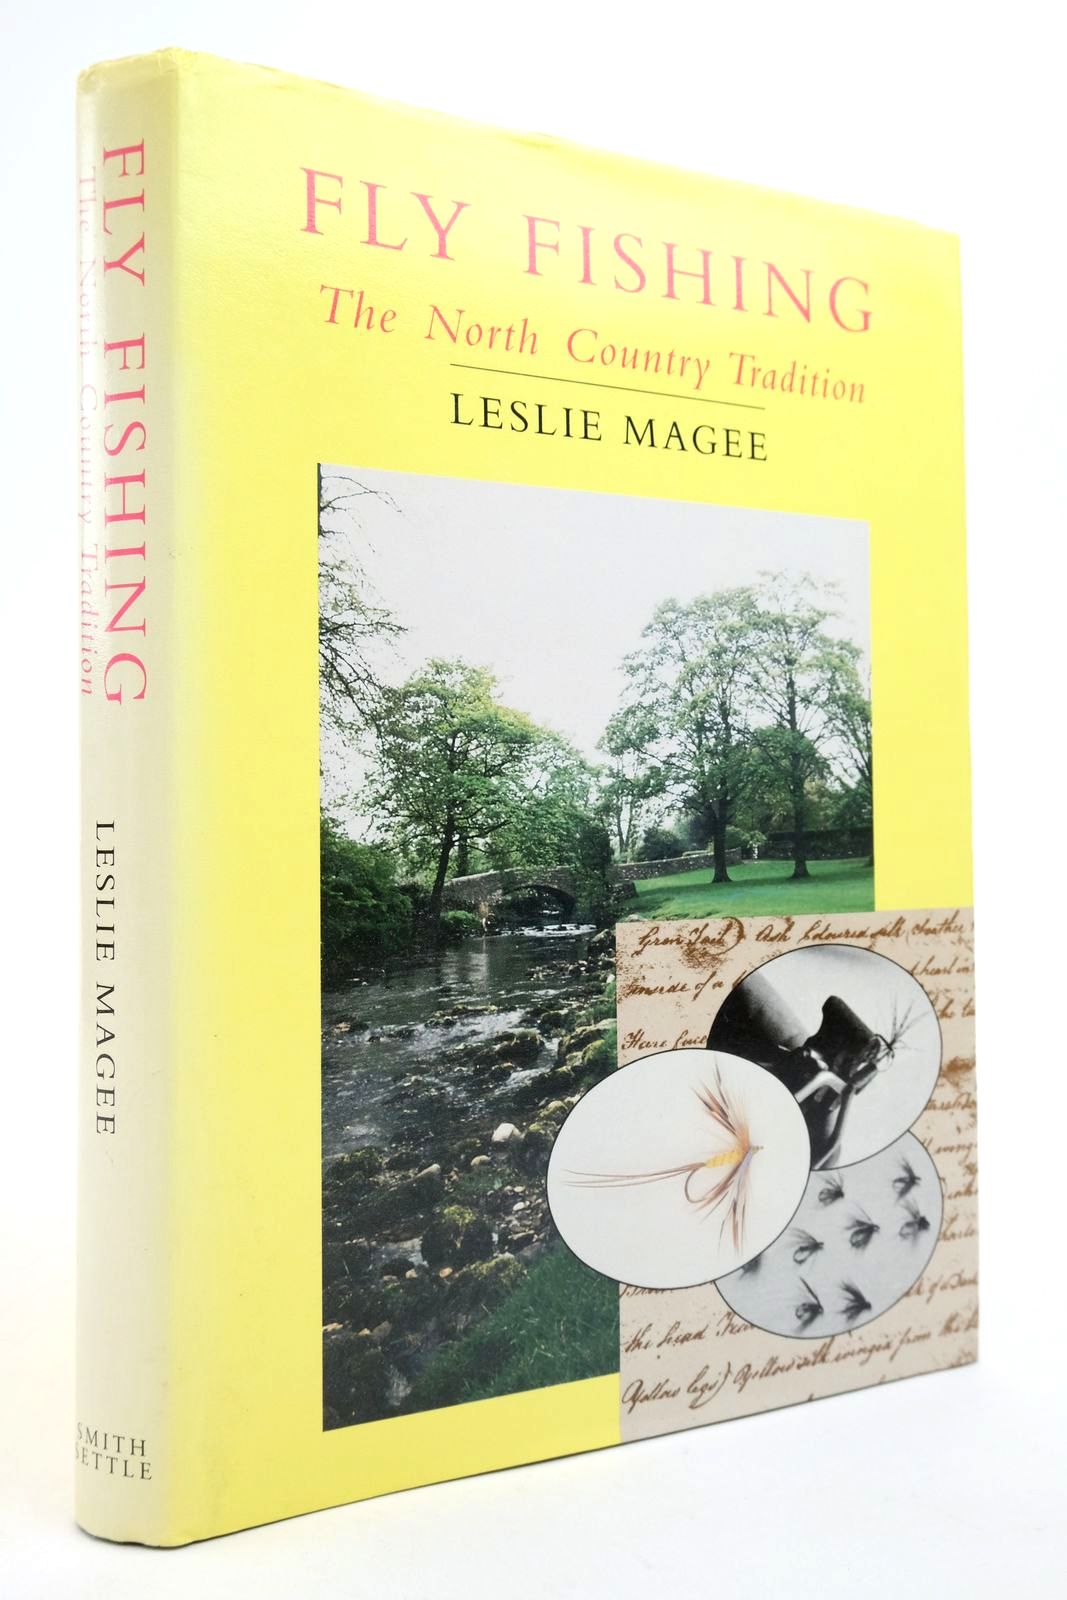 Photo of FLY FISHING: THE NORTH COUNTRY TRADITION written by Magee, Leslie published by Smith Settle Ltd. (STOCK CODE: 2139602)  for sale by Stella & Rose's Books